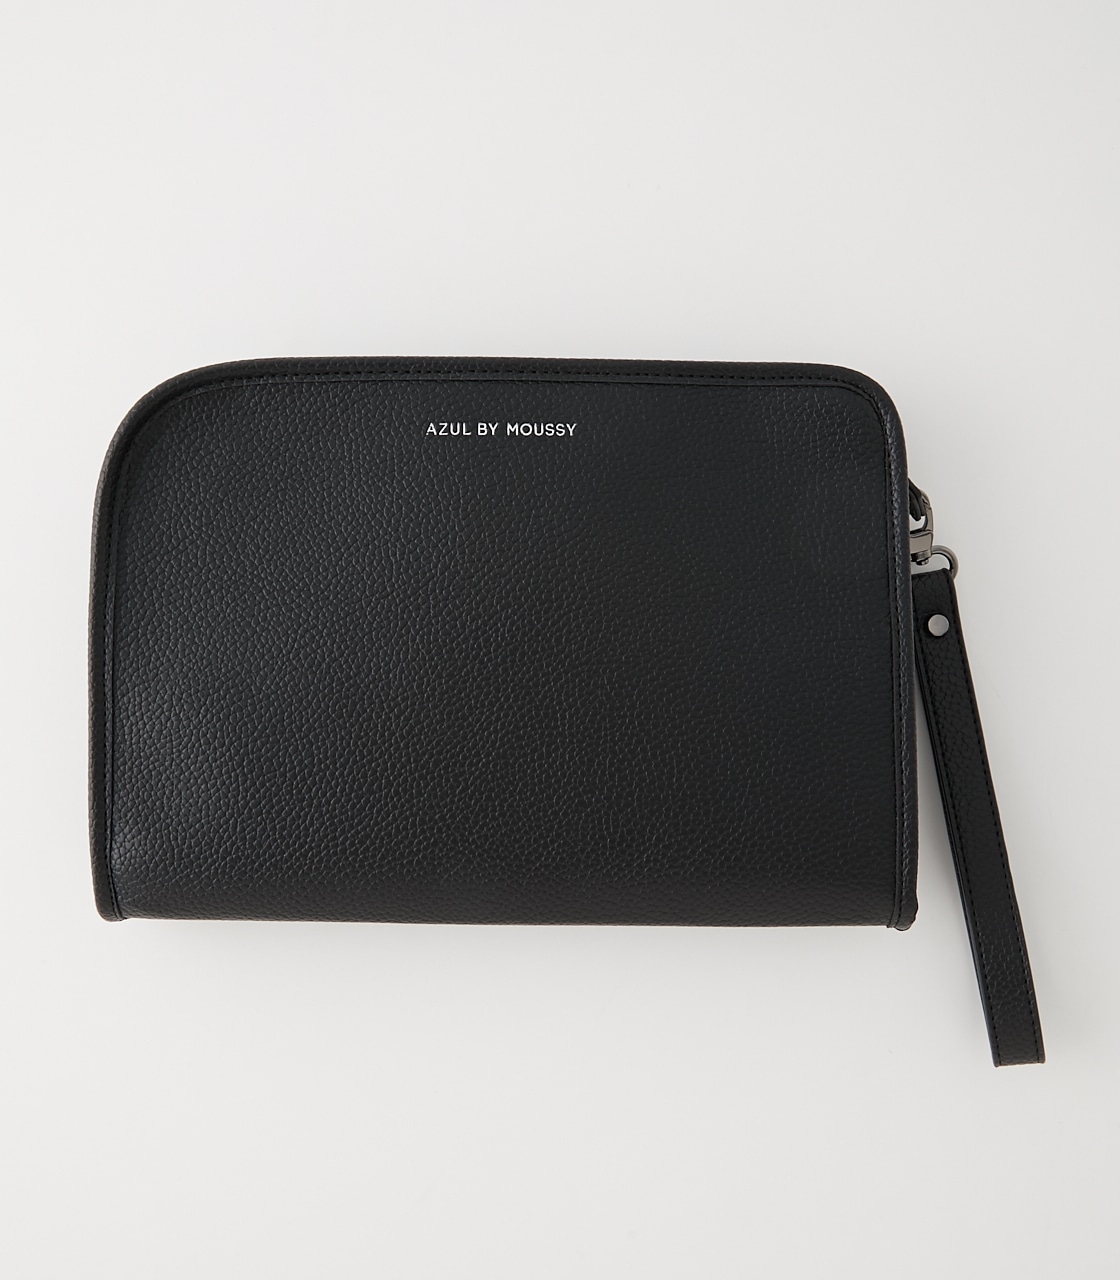 Eco Leather Box Clutch Bag エコレザーボックスクラッチバッグ Azul By Moussy アズール バイマウジー 公式通販サイト